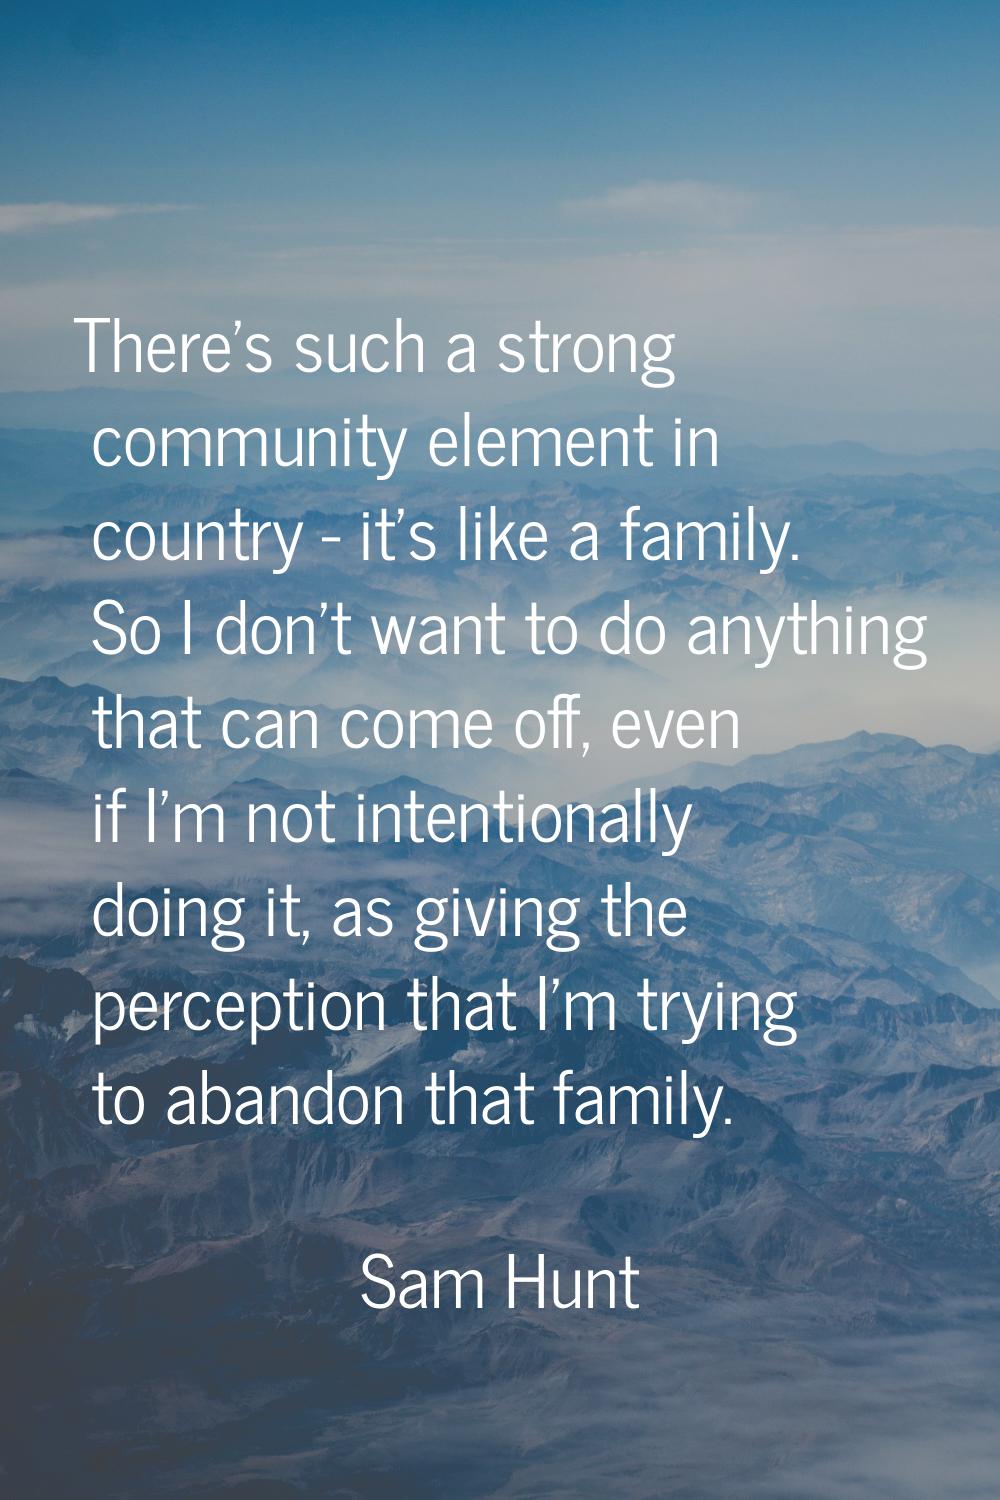 There's such a strong community element in country - it's like a family. So I don't want to do anyt